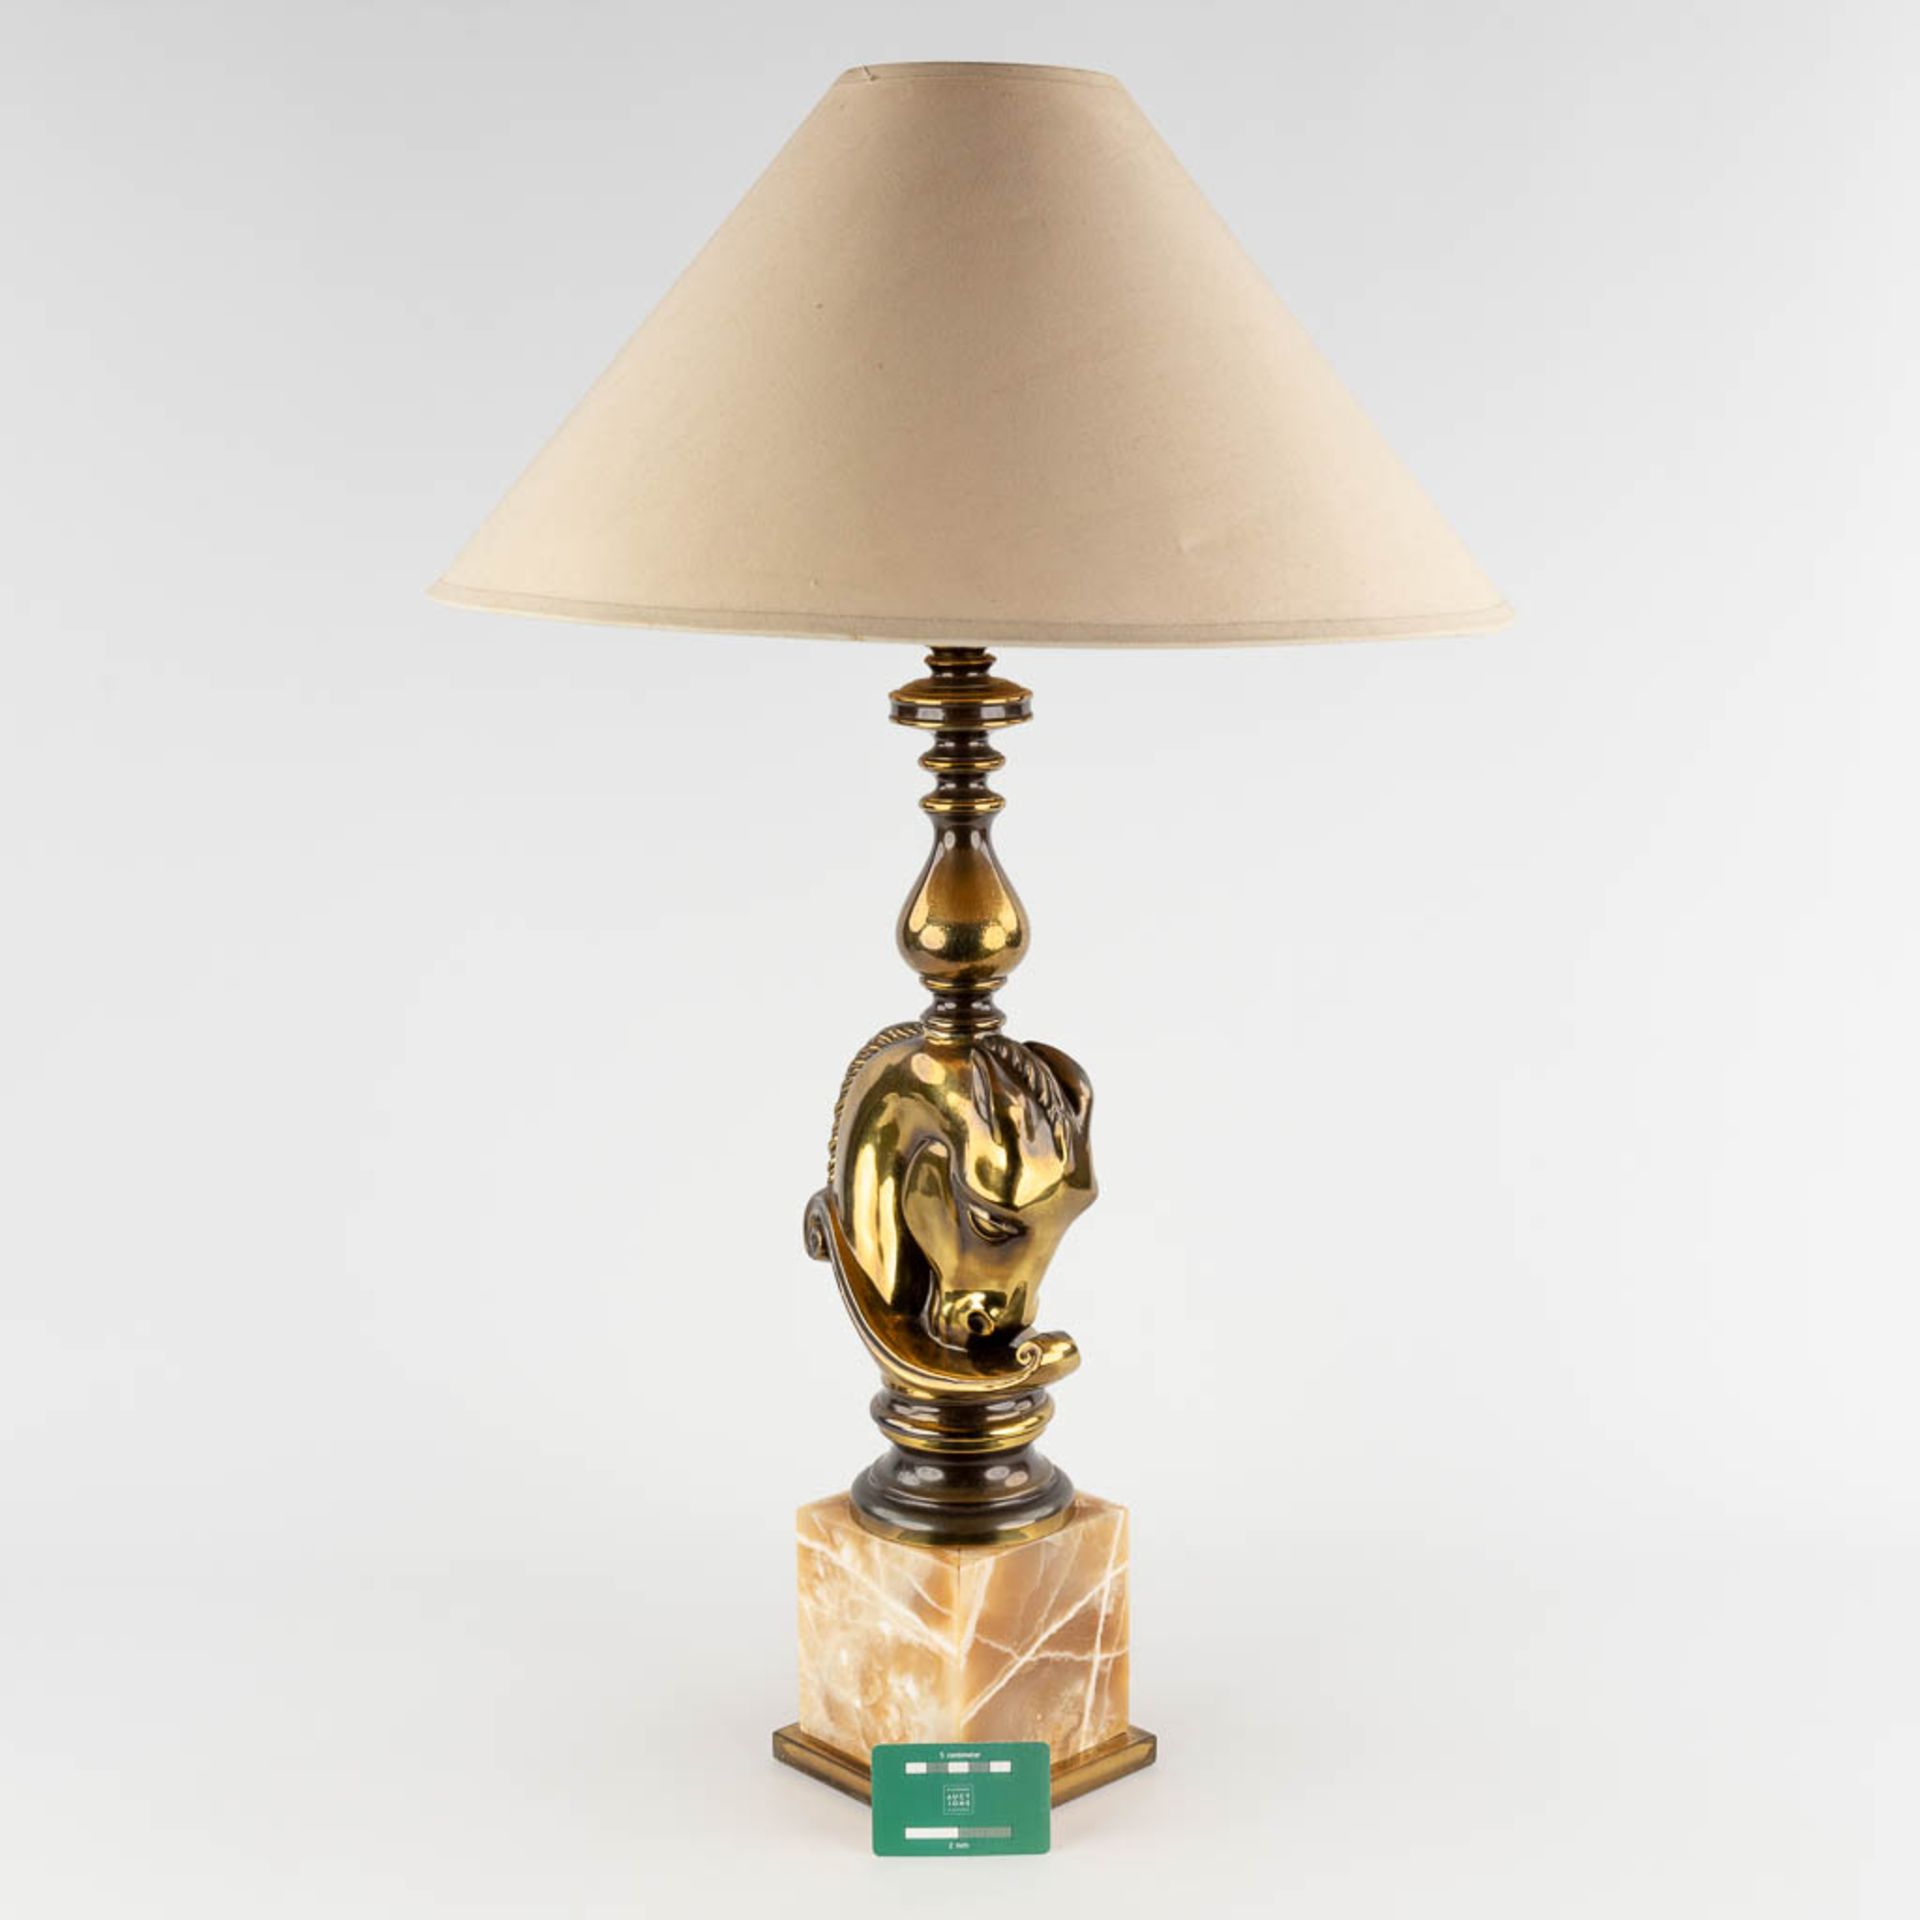 Deknudt, A table lamp with horse head, bronze on onyx. (D:14 x W:18 x H:60 cm) - Image 2 of 10